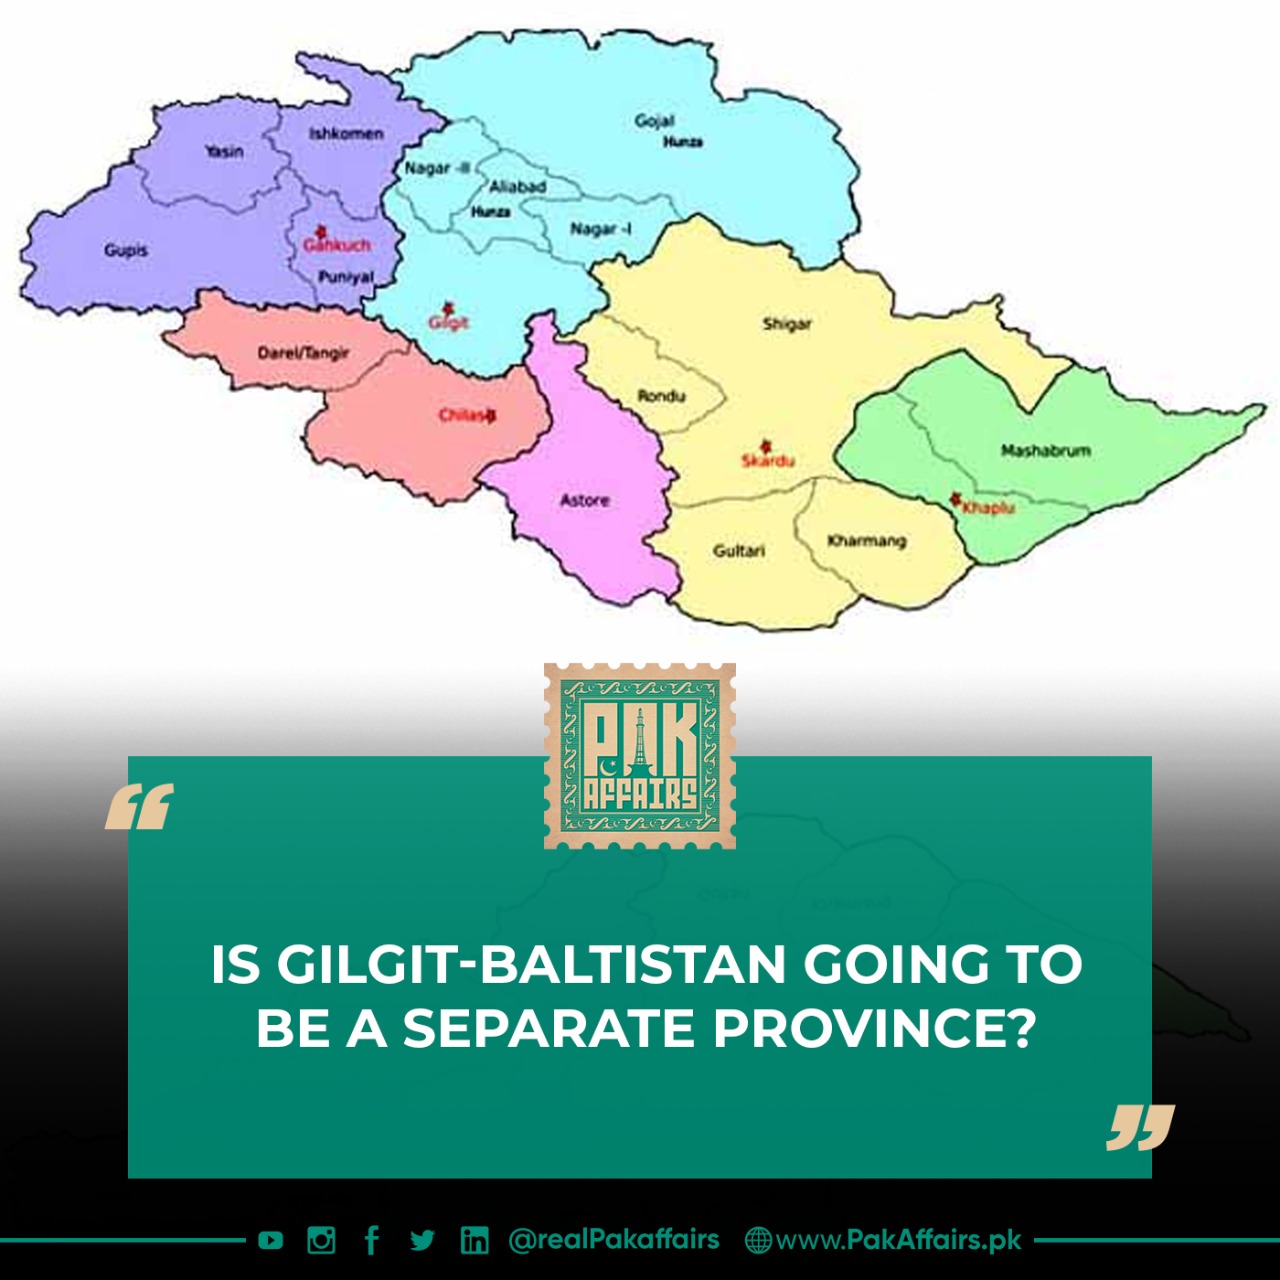 Is Gilgit-Baltistan going to be a separate province?